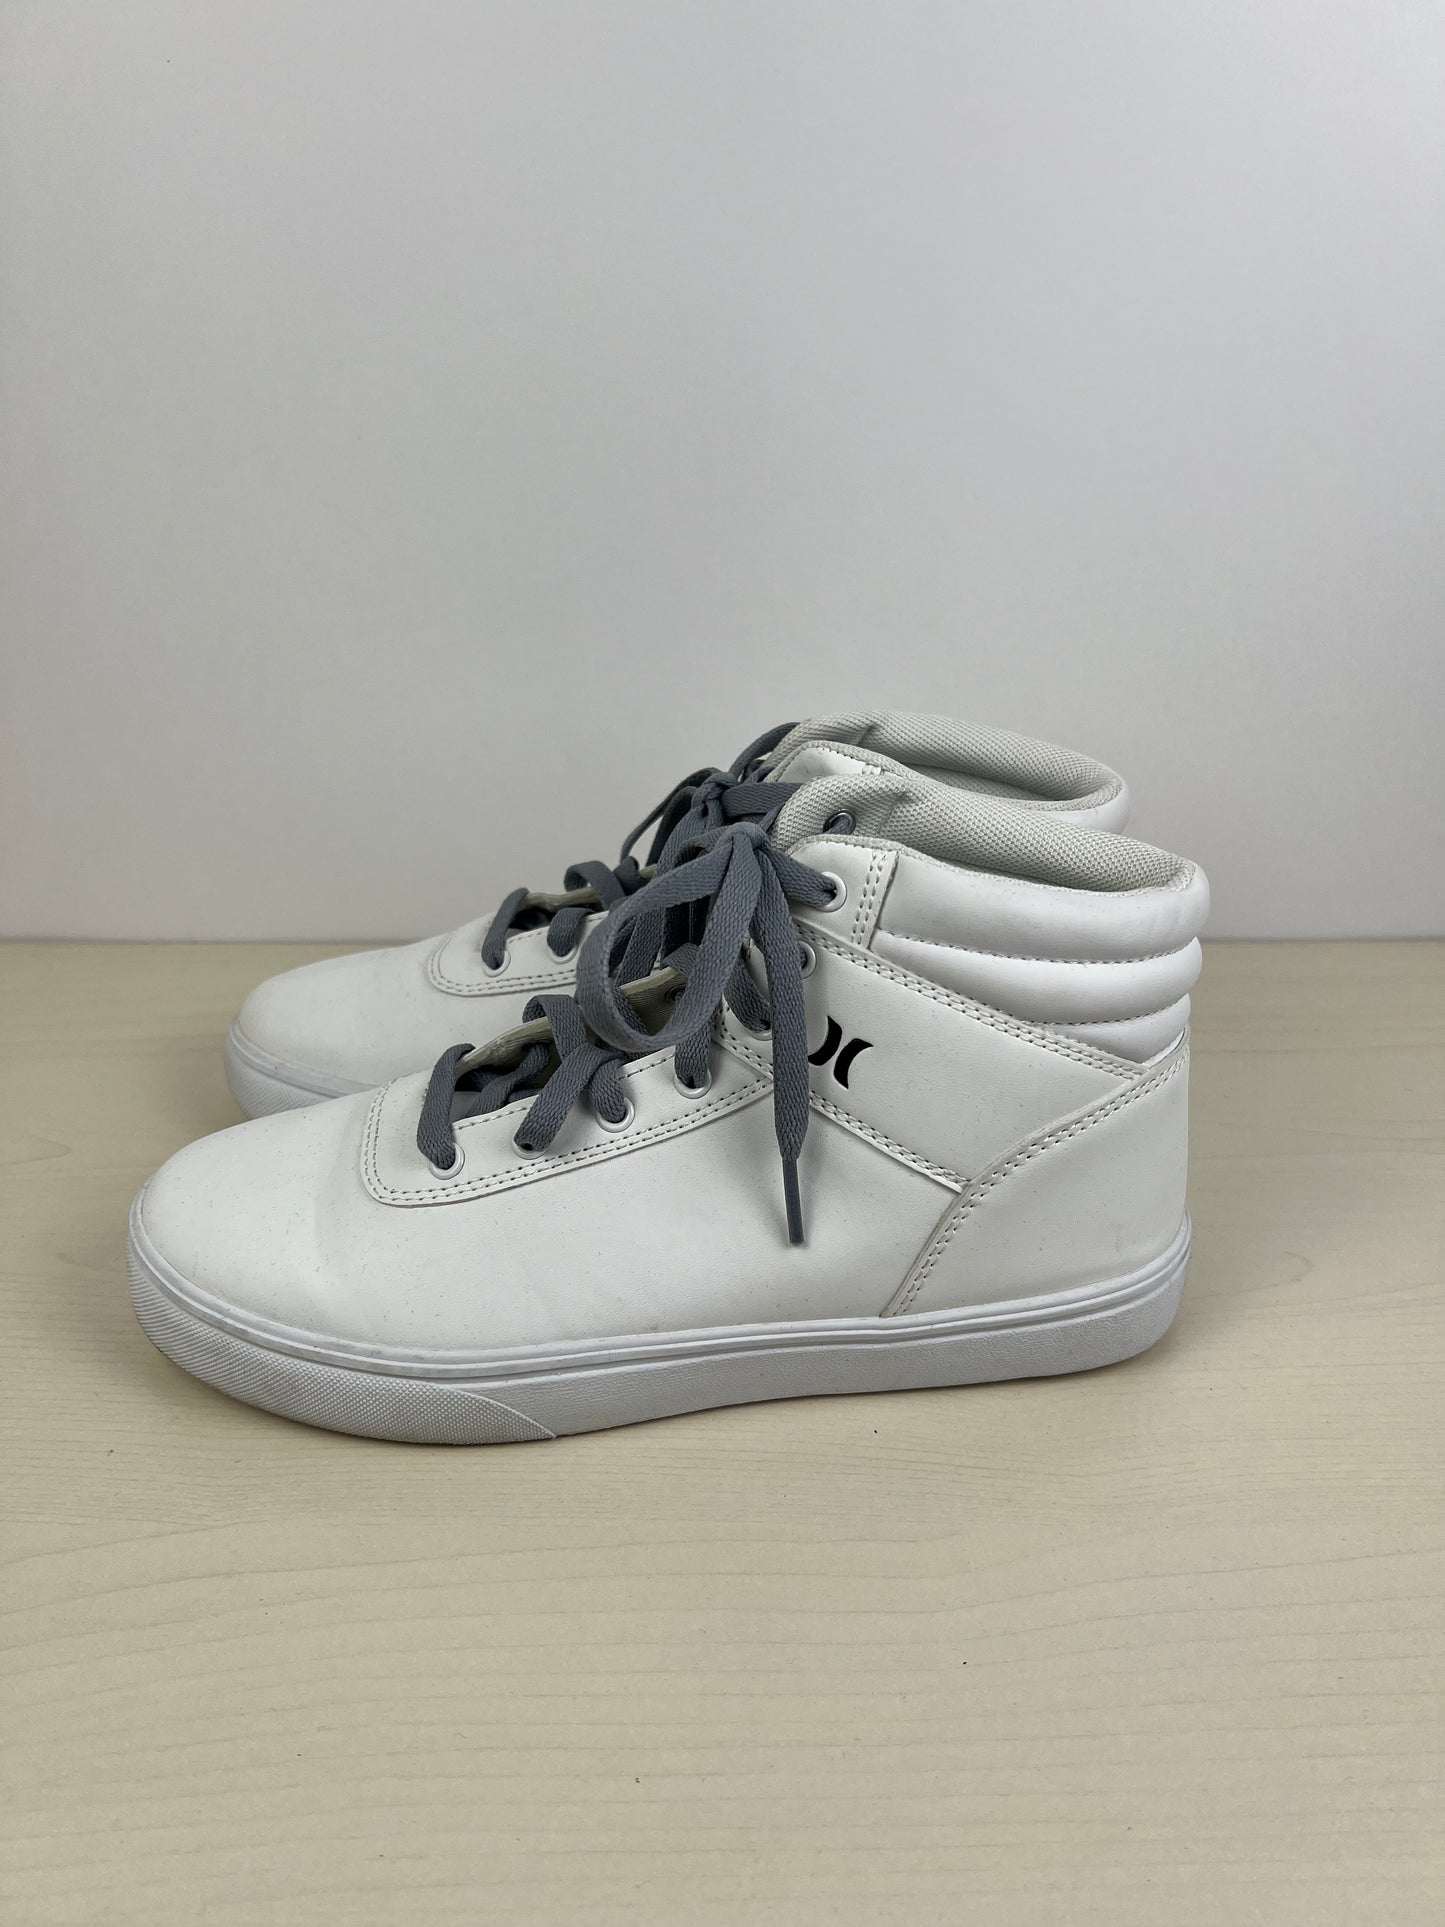 Shoes Sneakers By Hurley  Size: 8